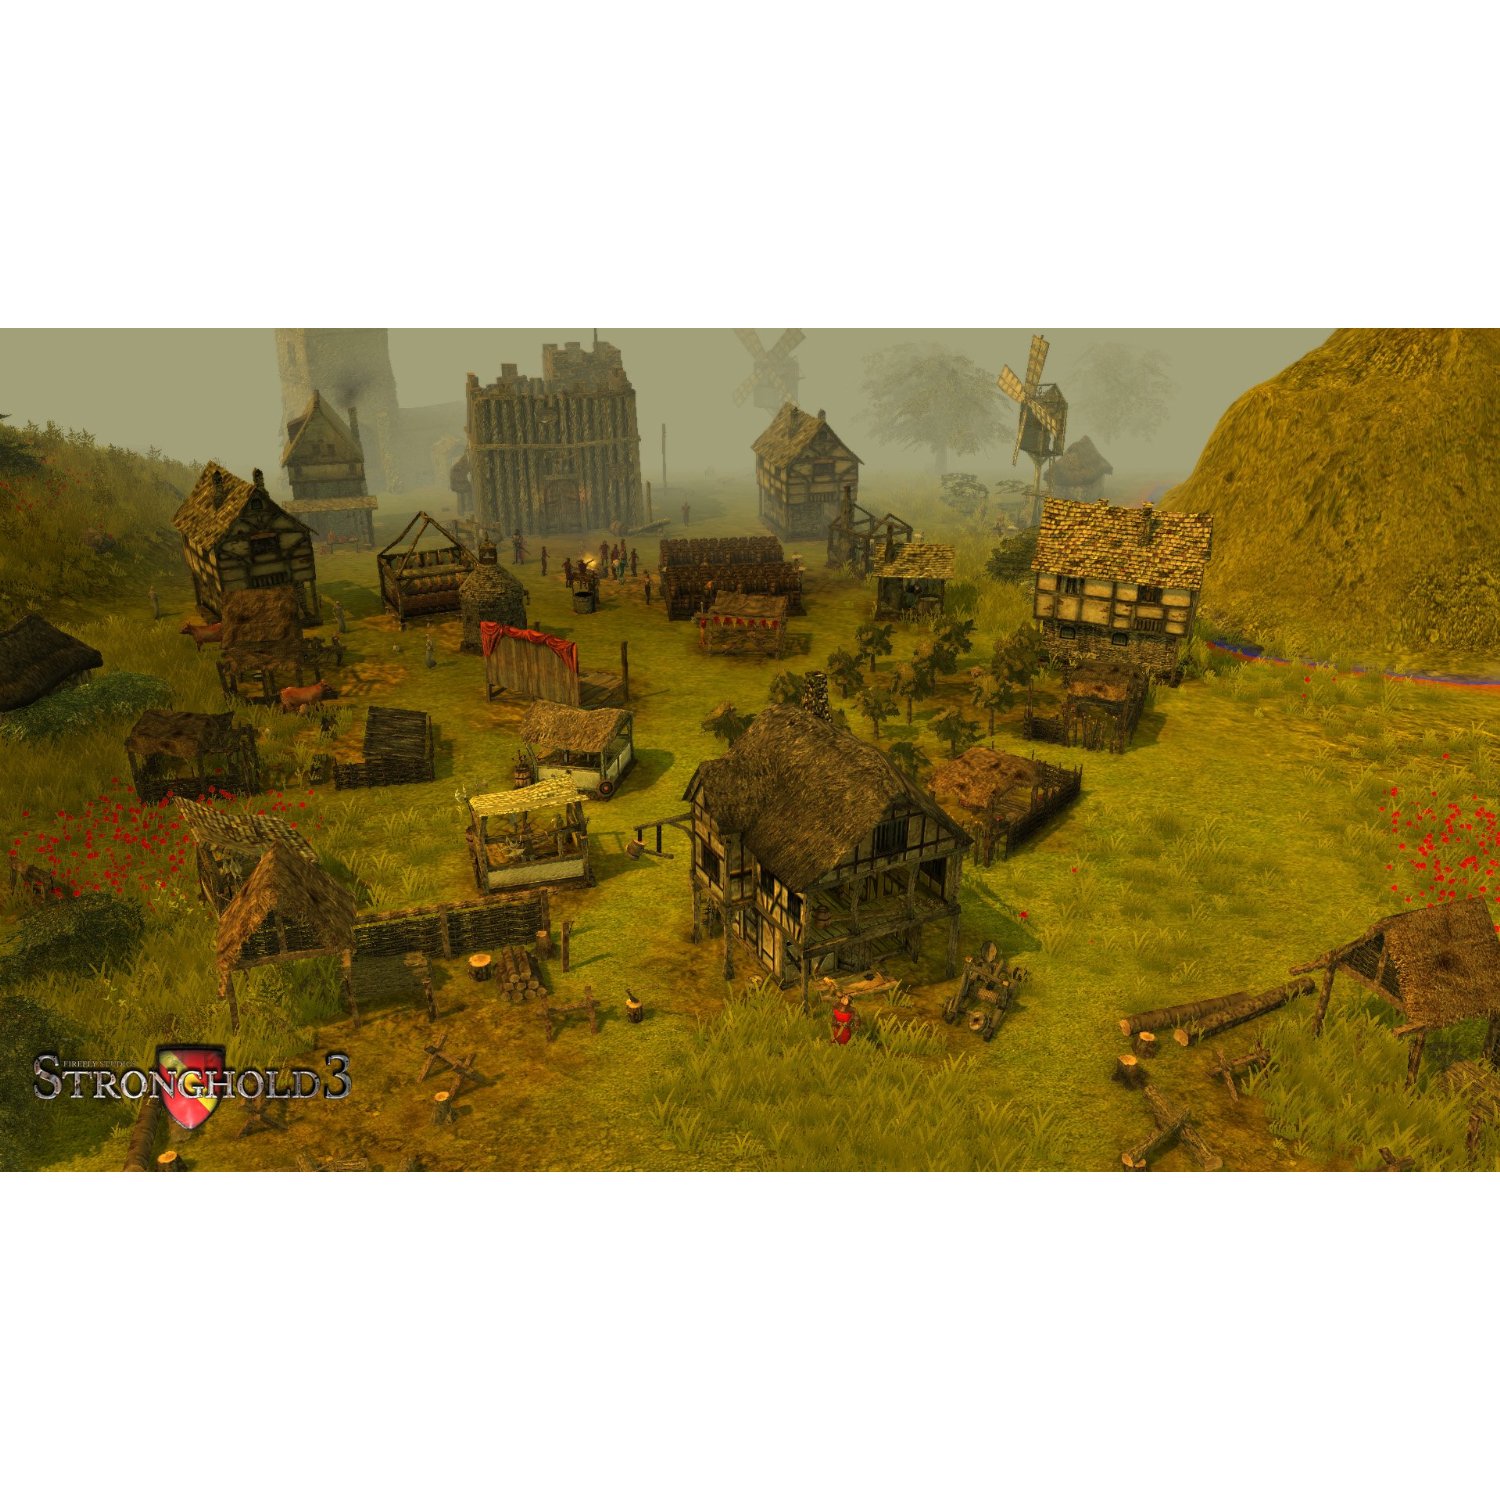 http://thetechjournal.com/wp-content/uploads/images/1110/1319511406-stronghold-3--pc-game-available-from-today-at-amazon-2.jpg